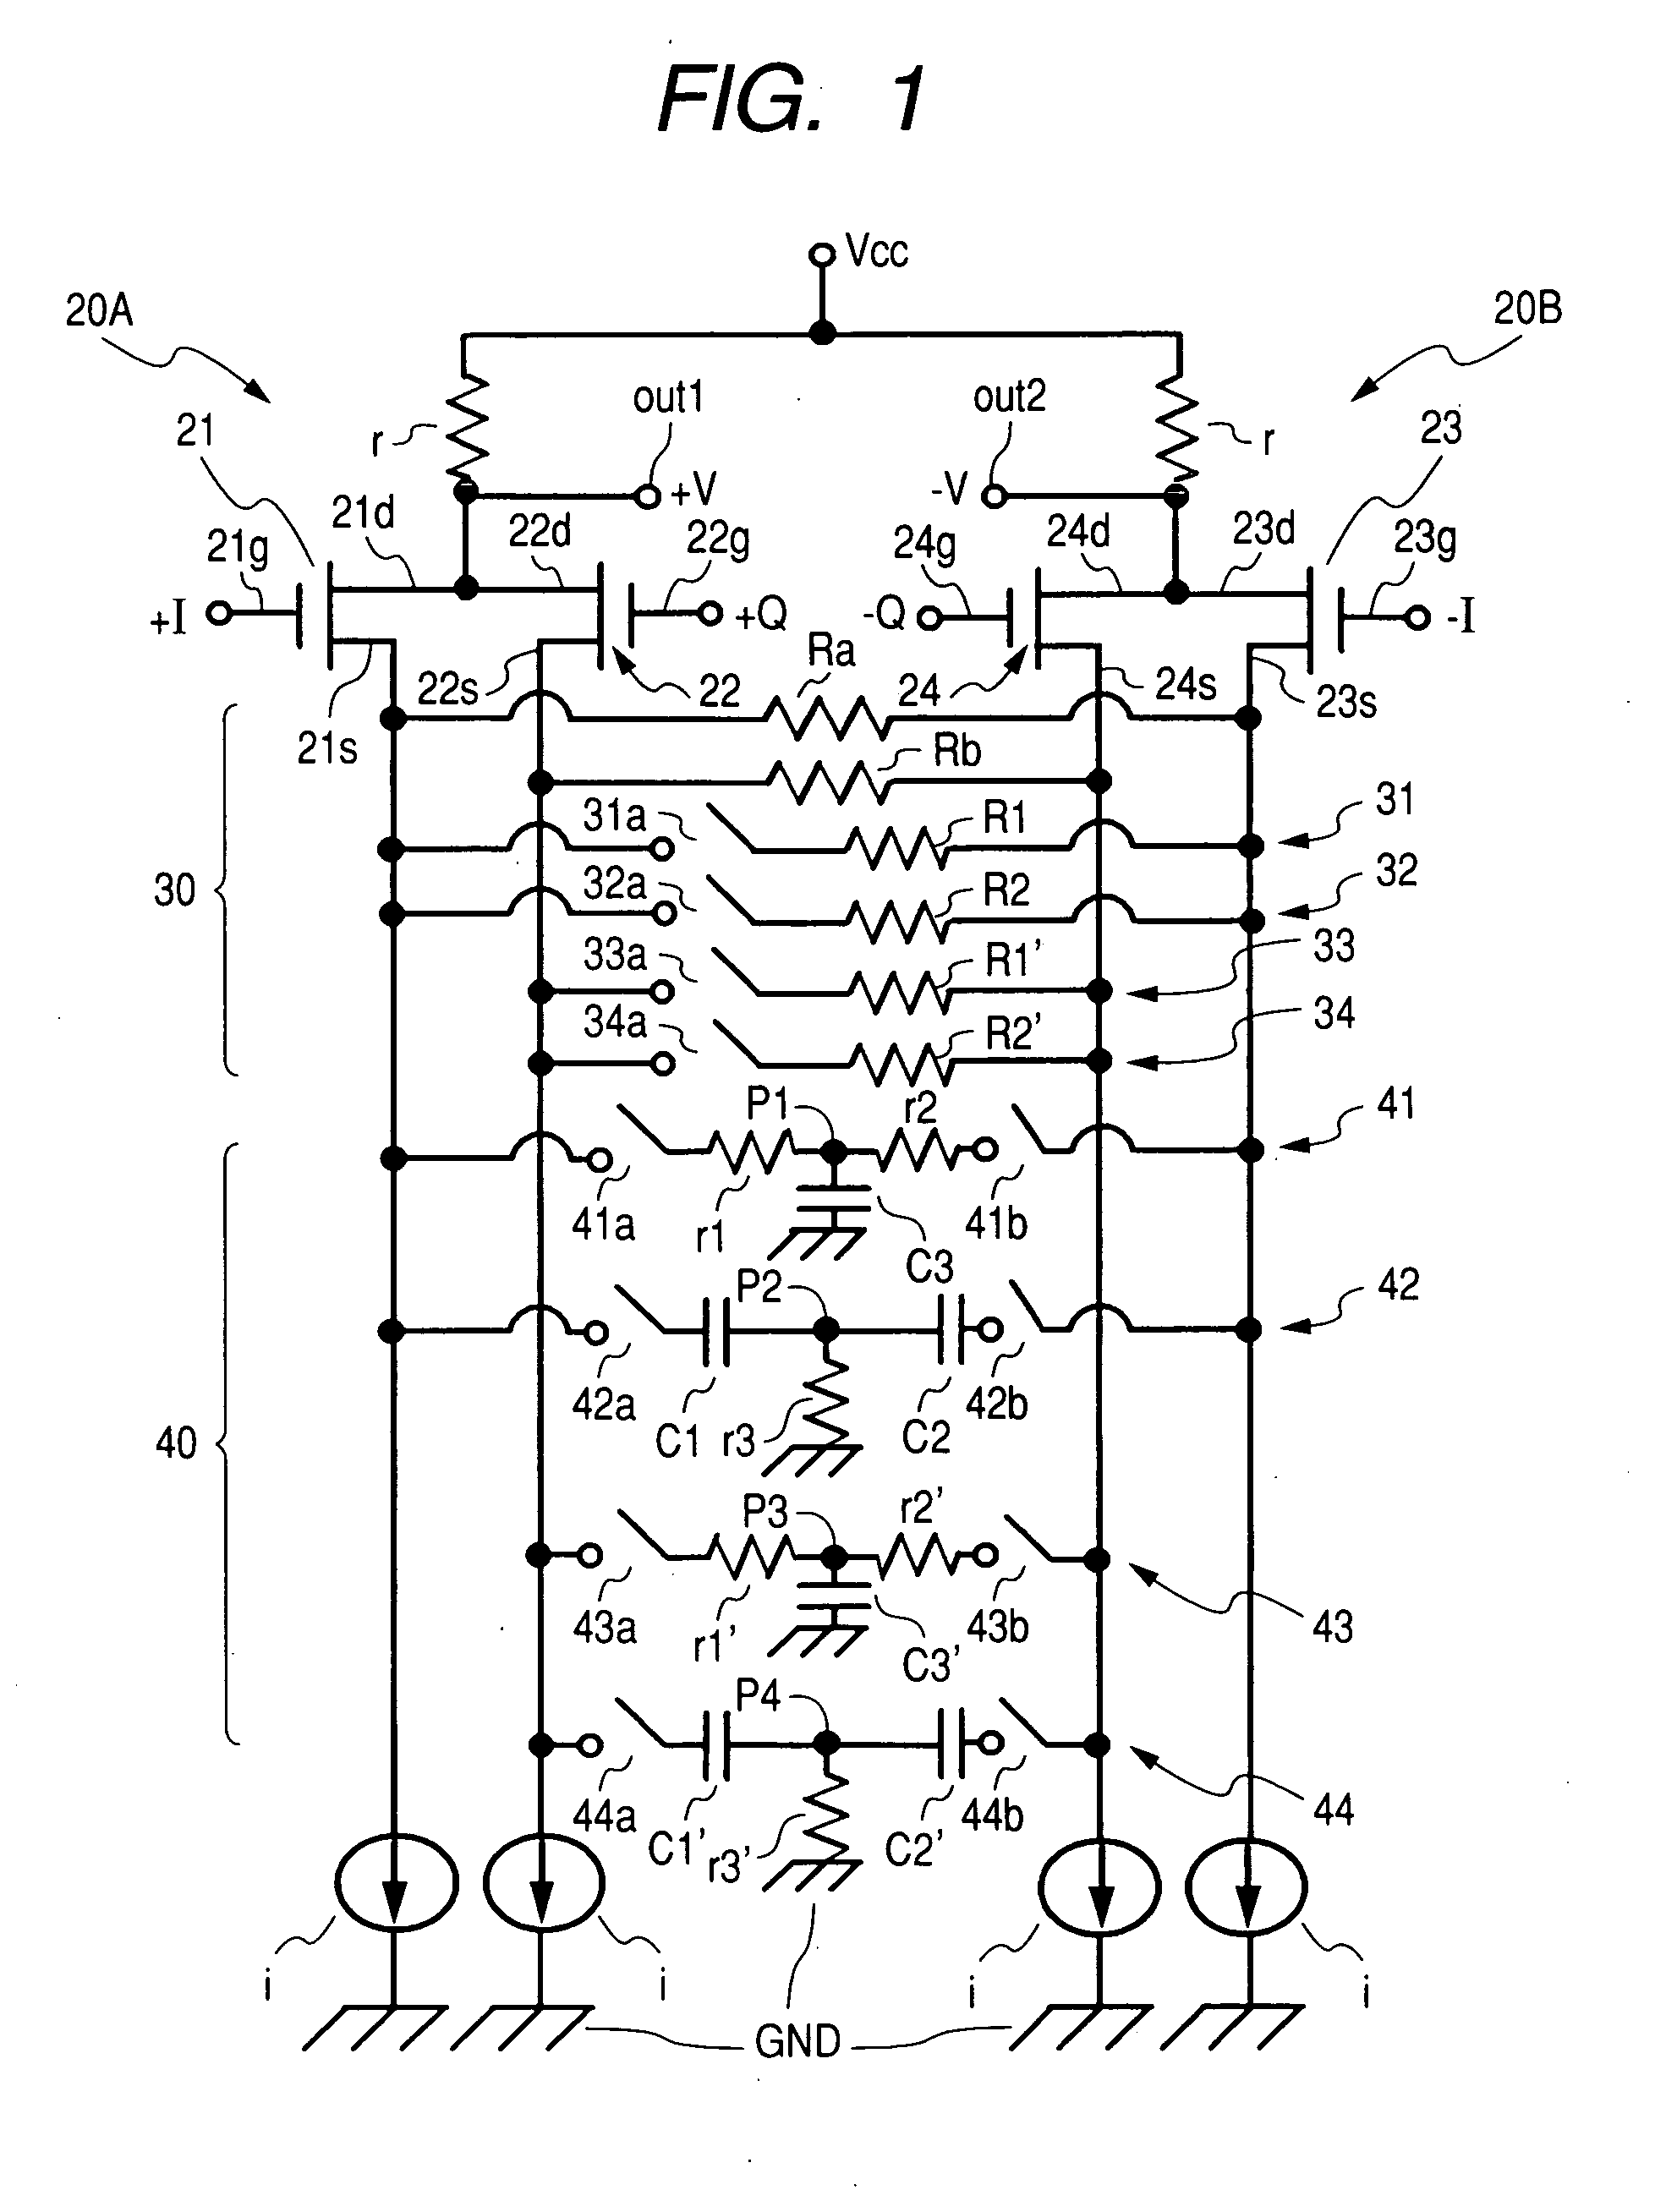 Signal adder circuit capable of removing effects due to phase error or amplitude error of I and Q signals